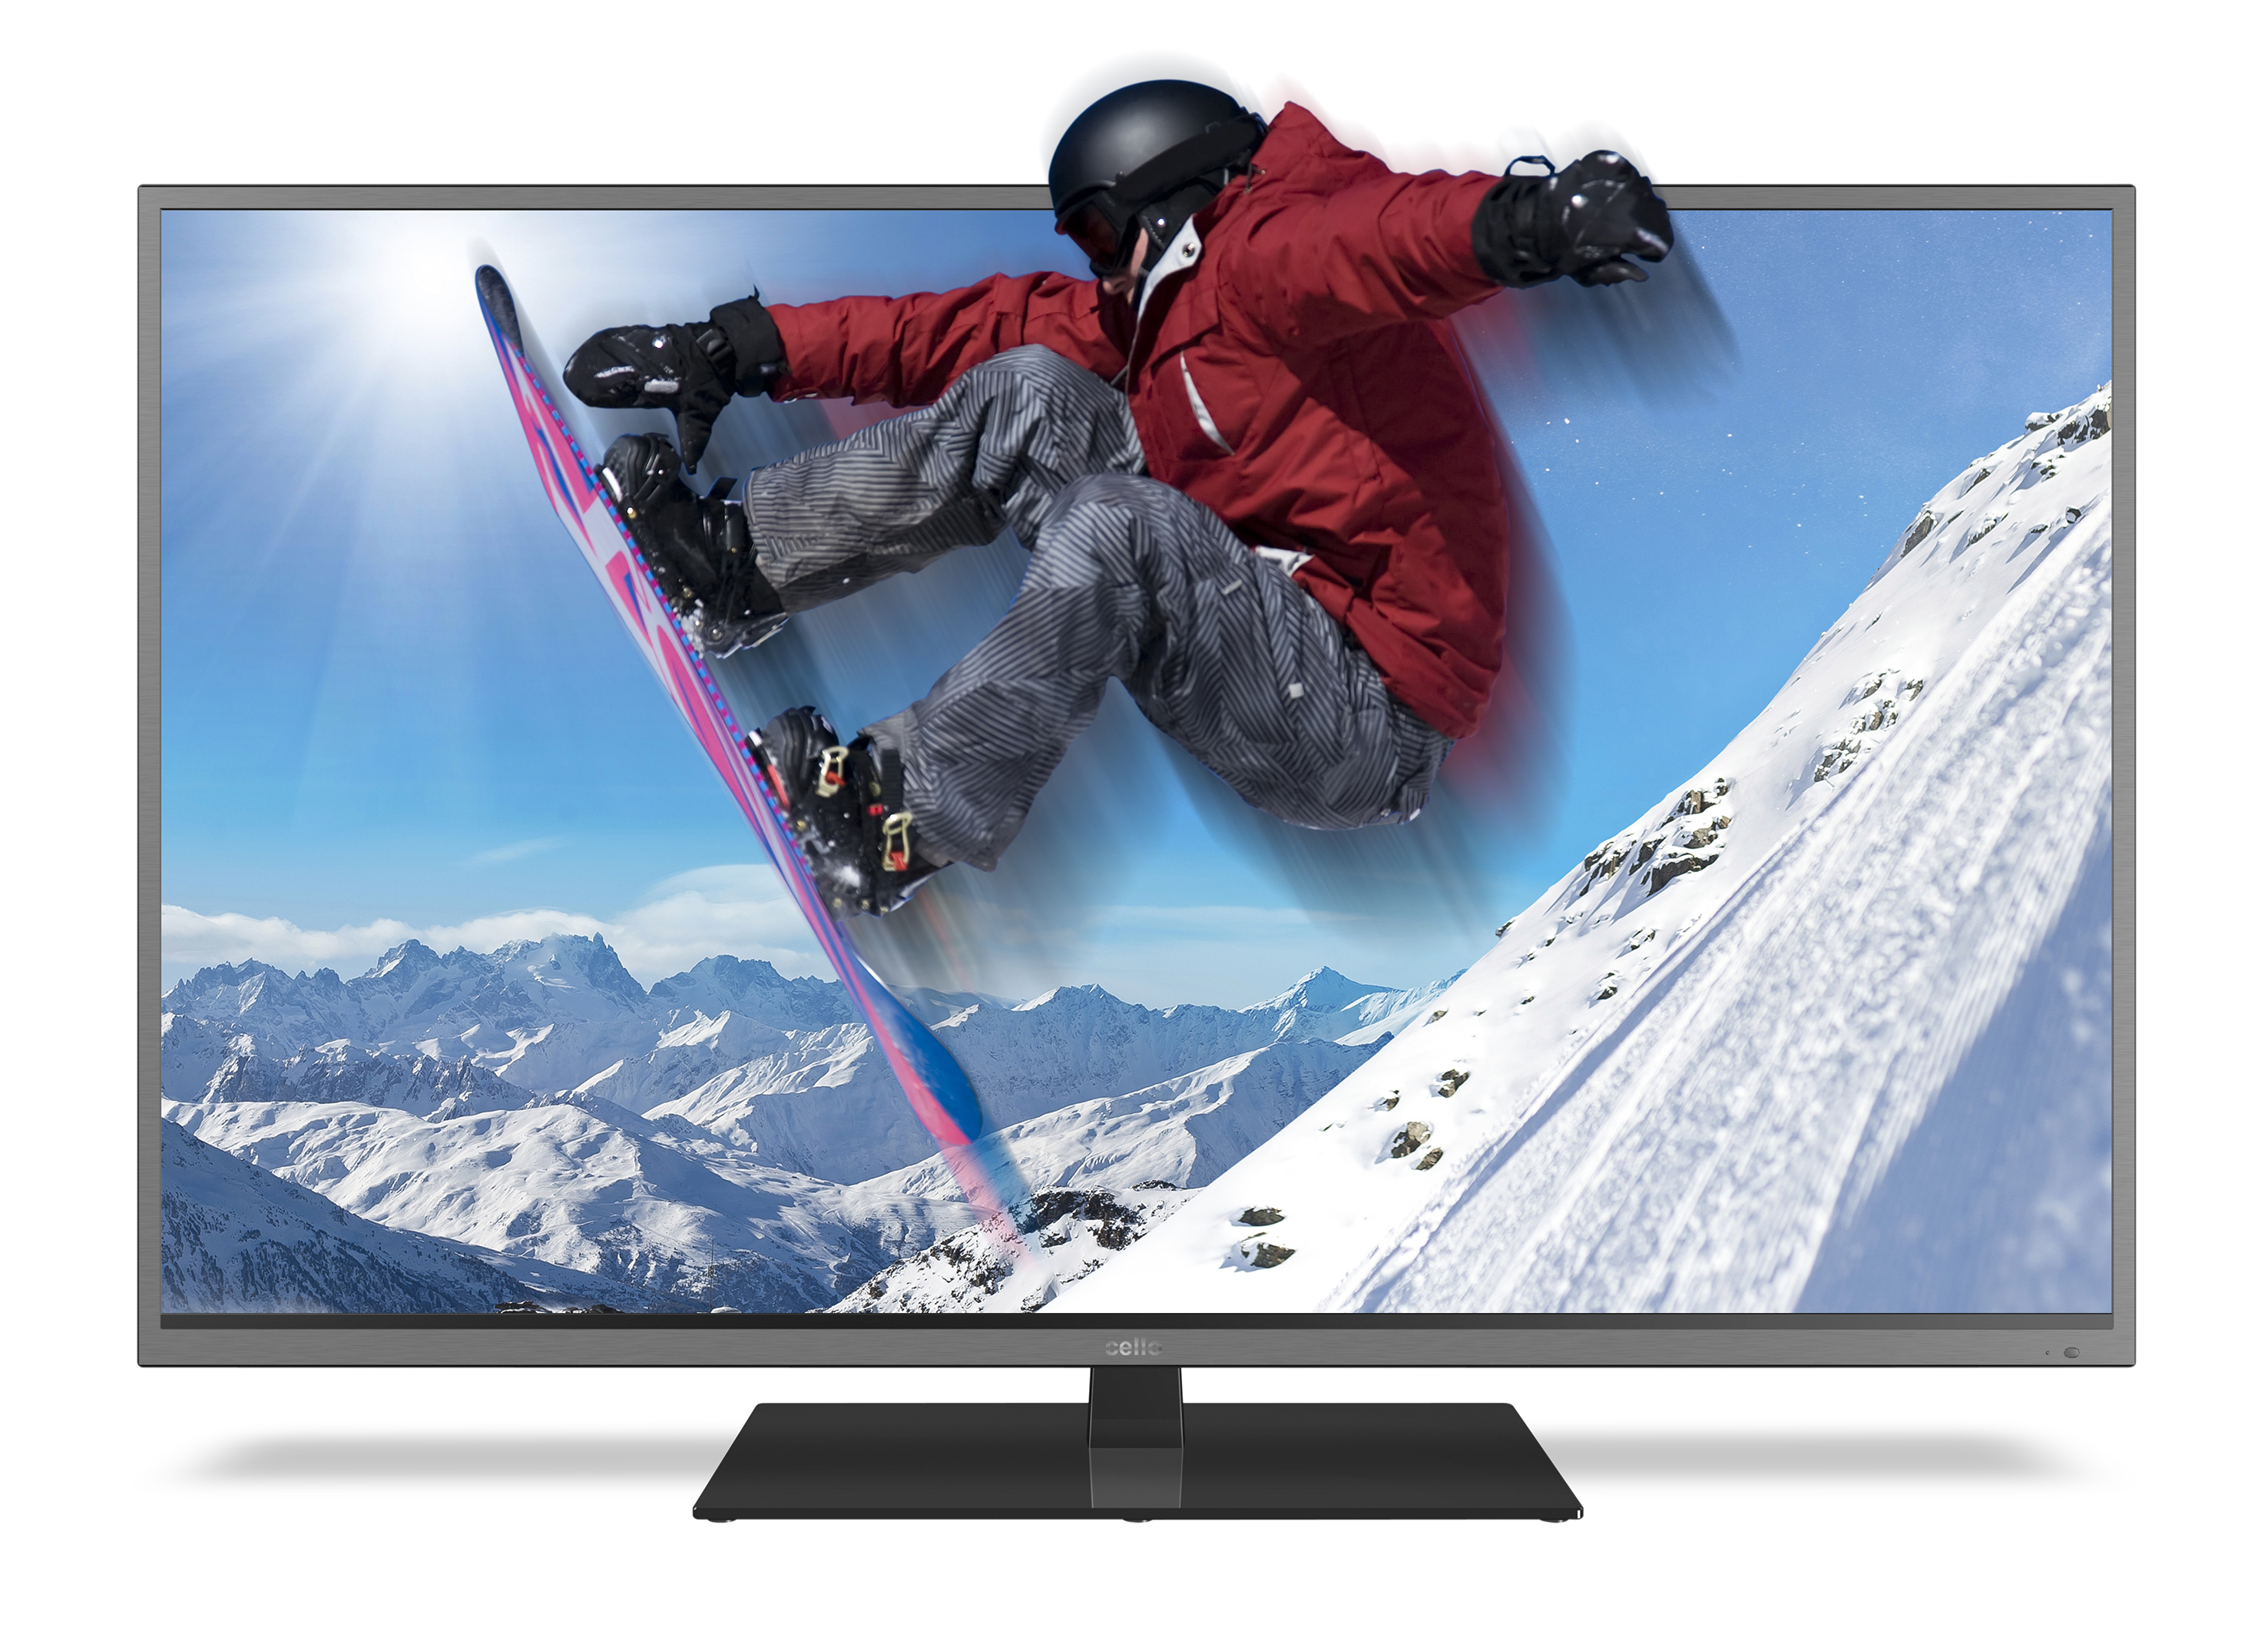 3D TV, LCD TV, LED TV, consumers electronics, UK made, 3D Television.